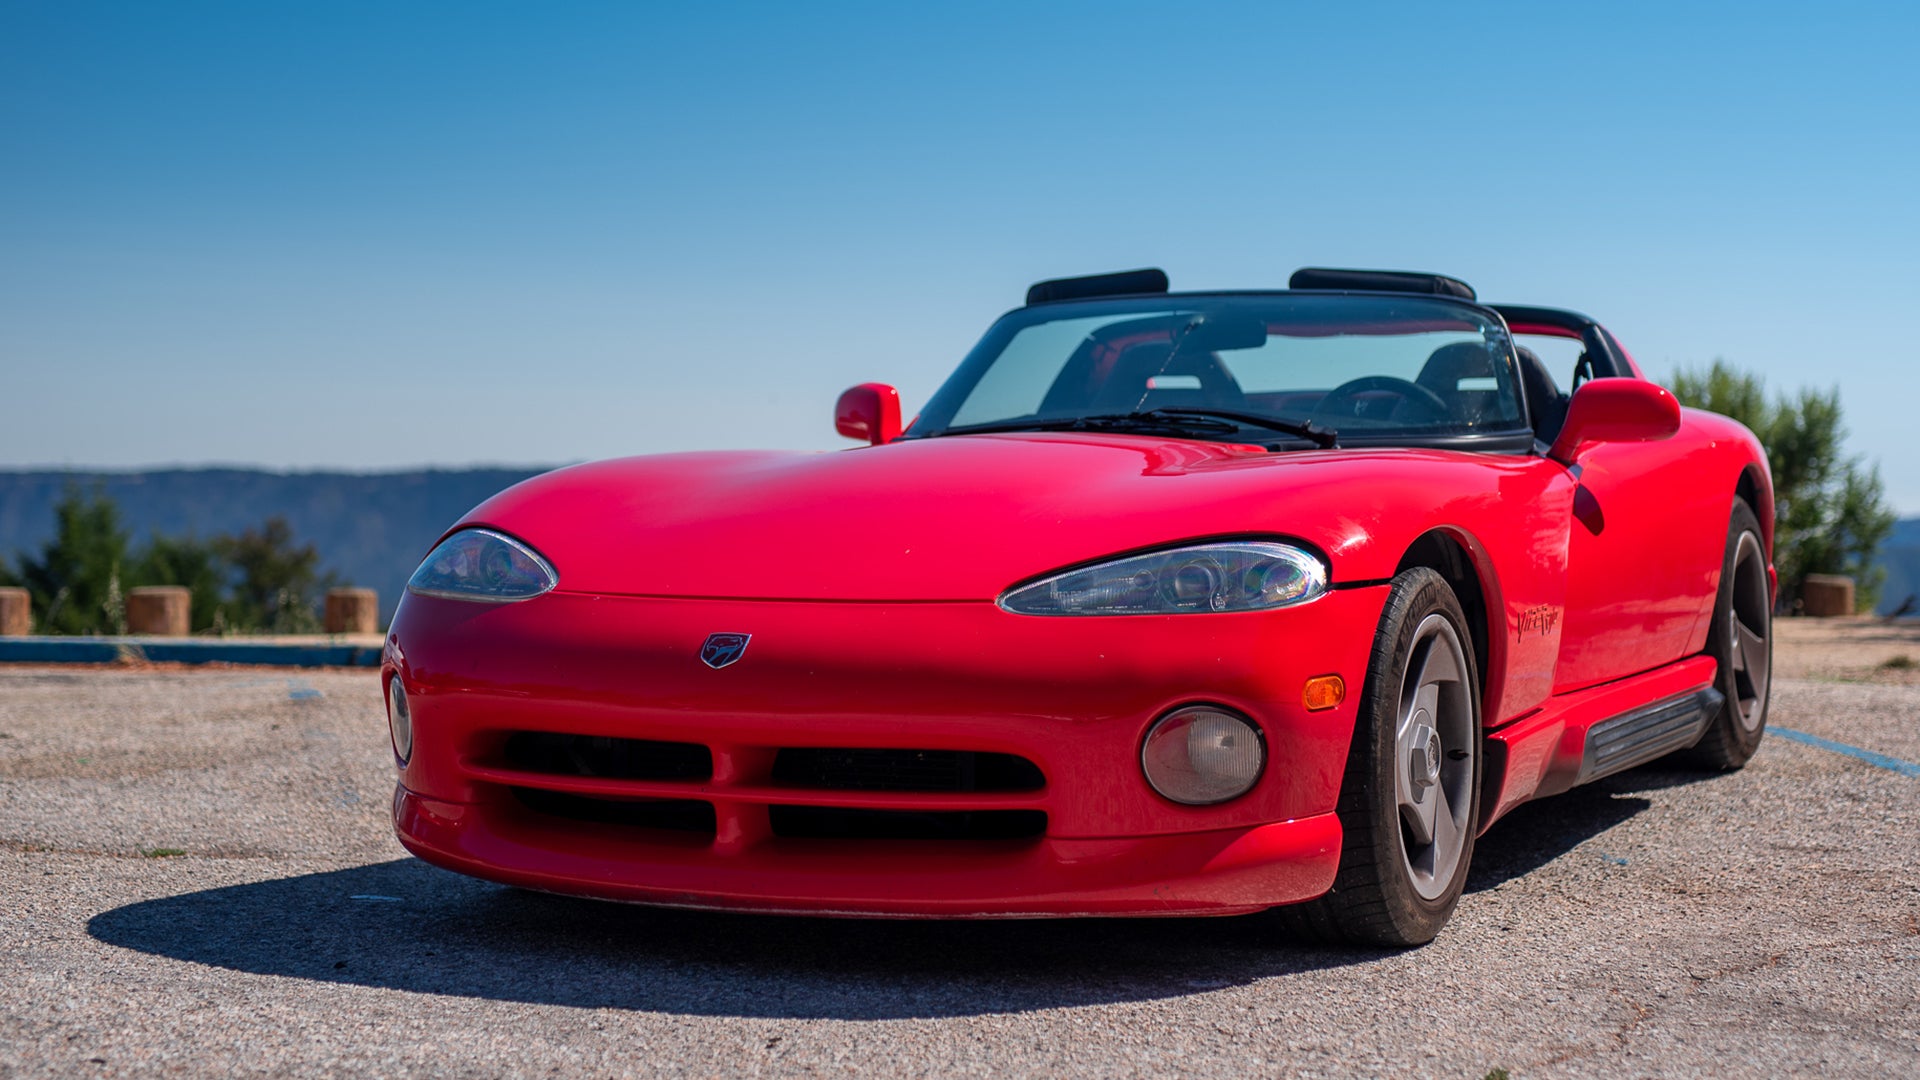 1994 Dodge Viper RT/10 Review: Taming Machismo In Car Form